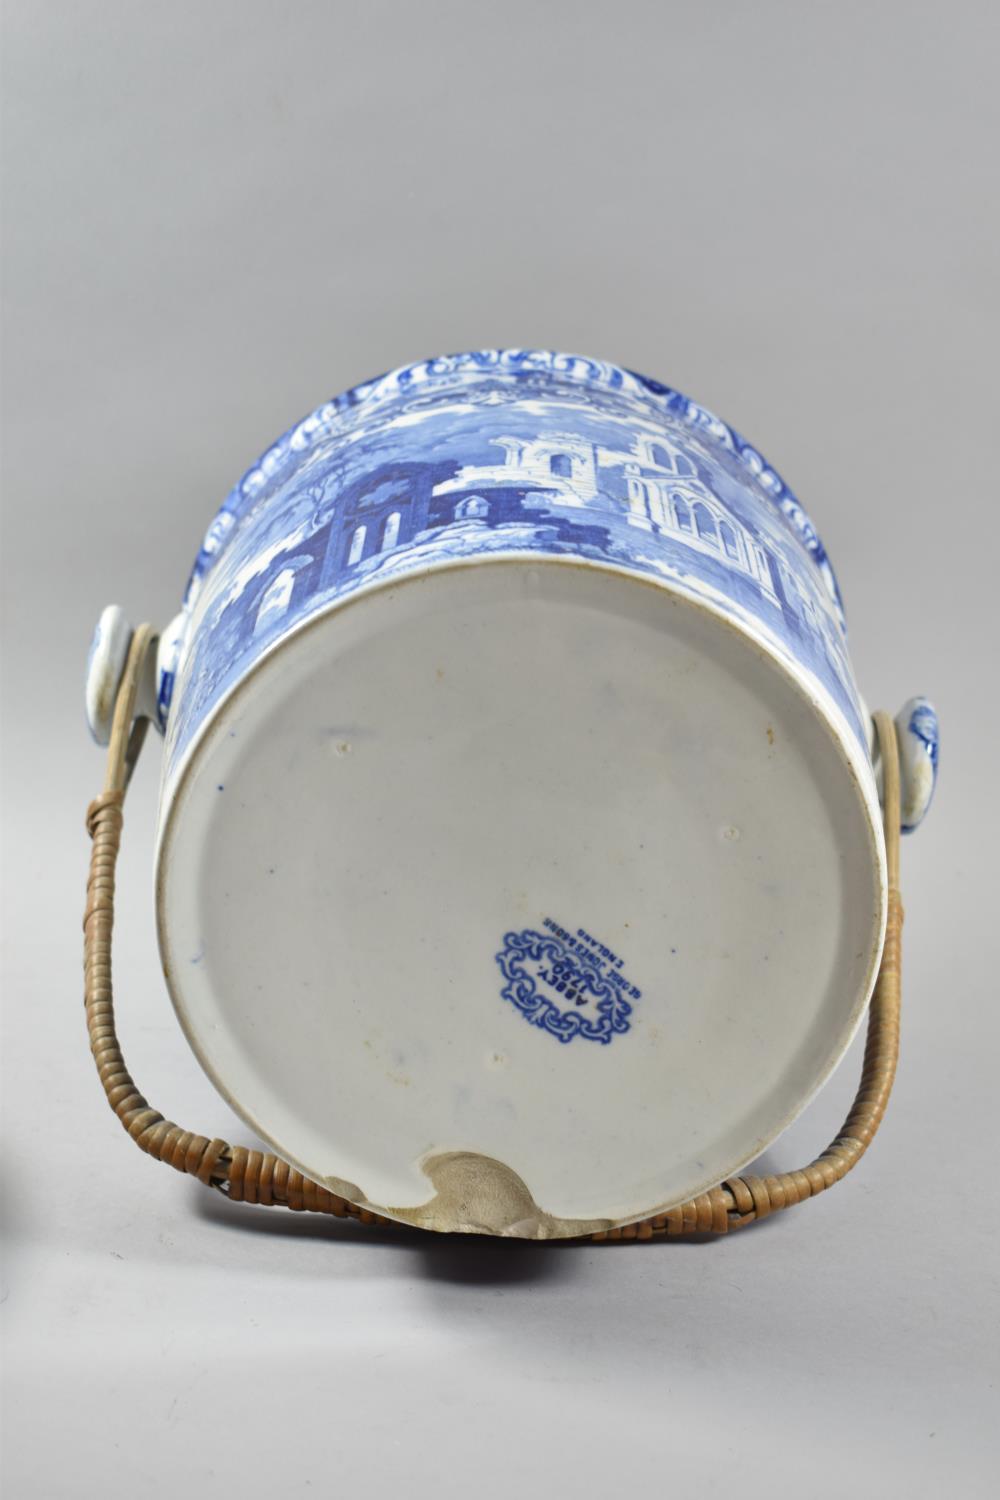 A Transfer Printed Blue and White Toiletry Pail with Cane Loop Handle, 25cm high, Chip to Base - Image 4 of 5